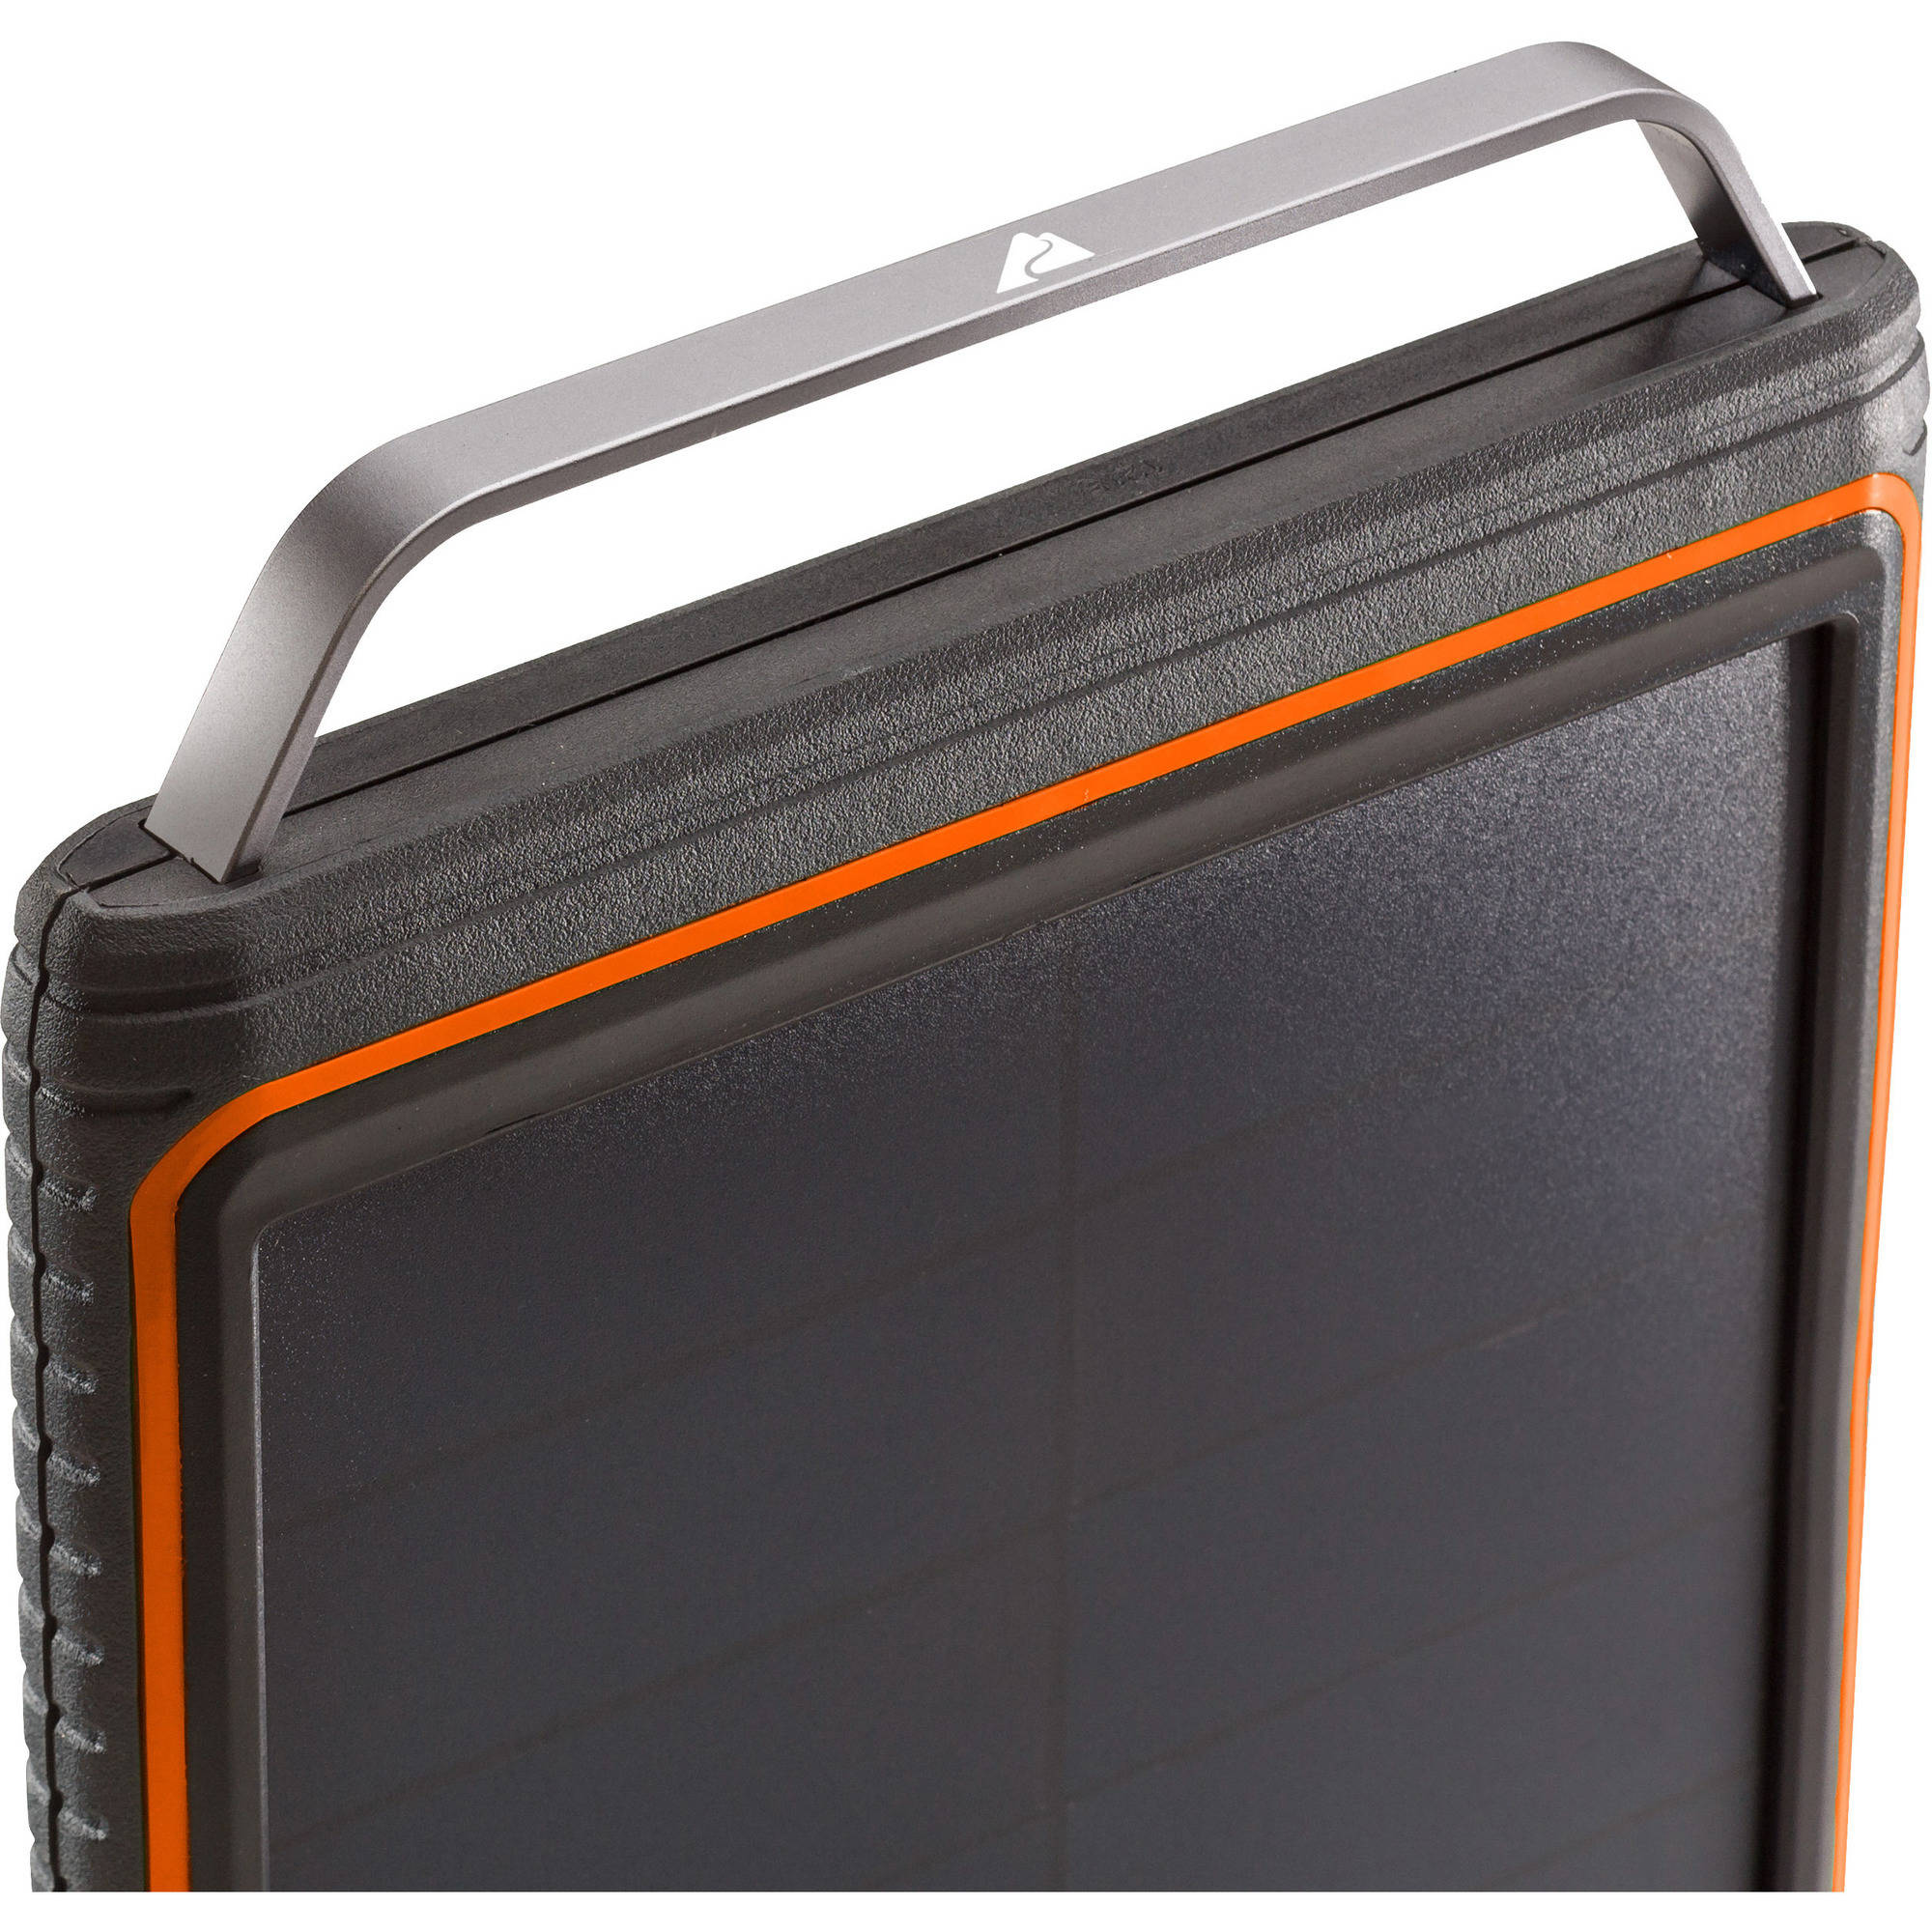 Ozark Trail 2400 Portable Phone Charger with Solar Panel - image 2 of 5